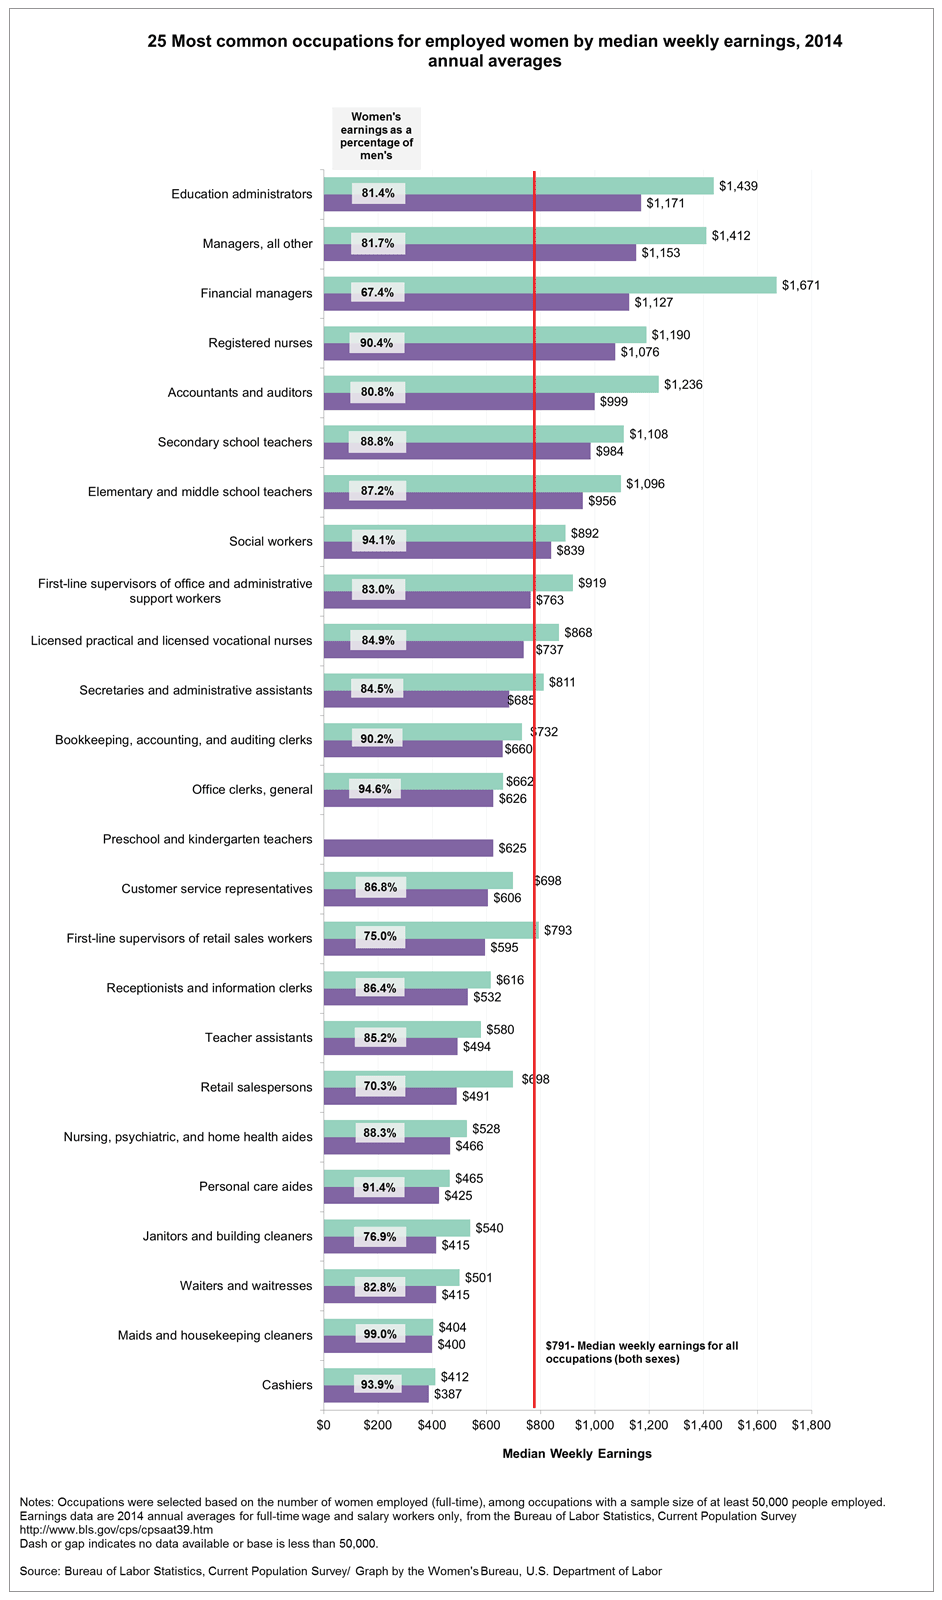 Text Version of 25 Most common occupations for employed women by median weekly earnings, (2014 annual averages).